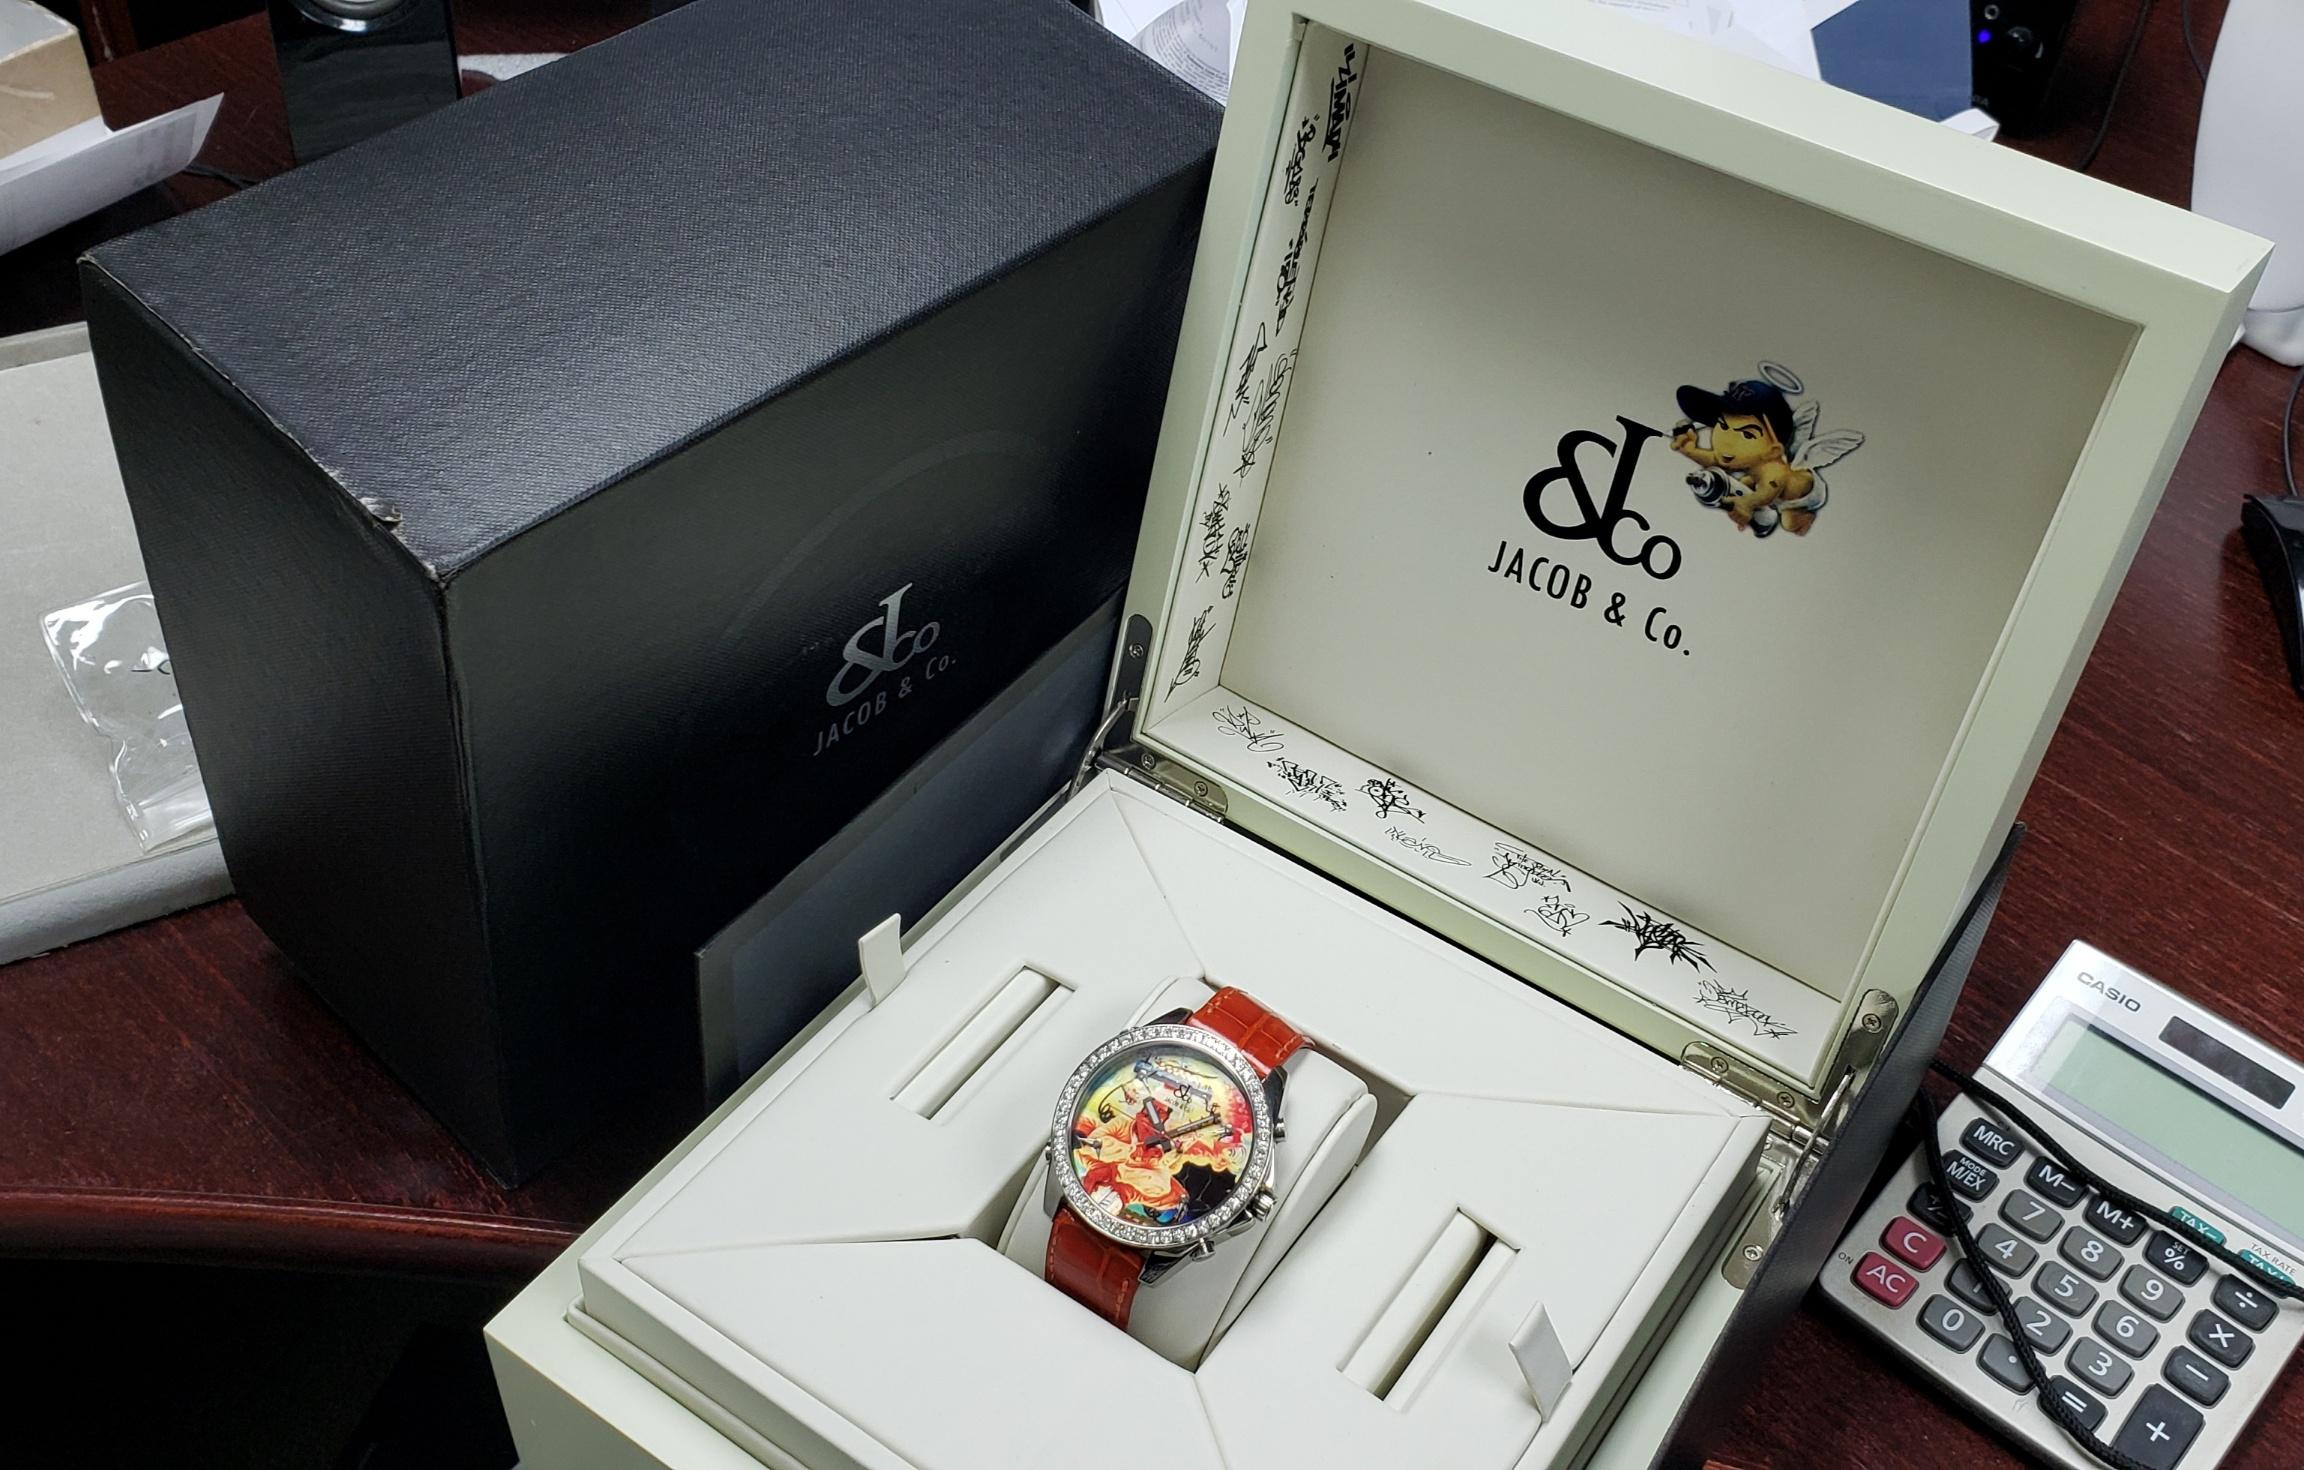 100% authentic  Jacob & Co. MONYPIECE  watch with box, limited edition #2 out of 18 ever made.  I was not able to find the price reference on the internet (had to Google the image, still nothing came-up). I would like to start with $15,800.00, but